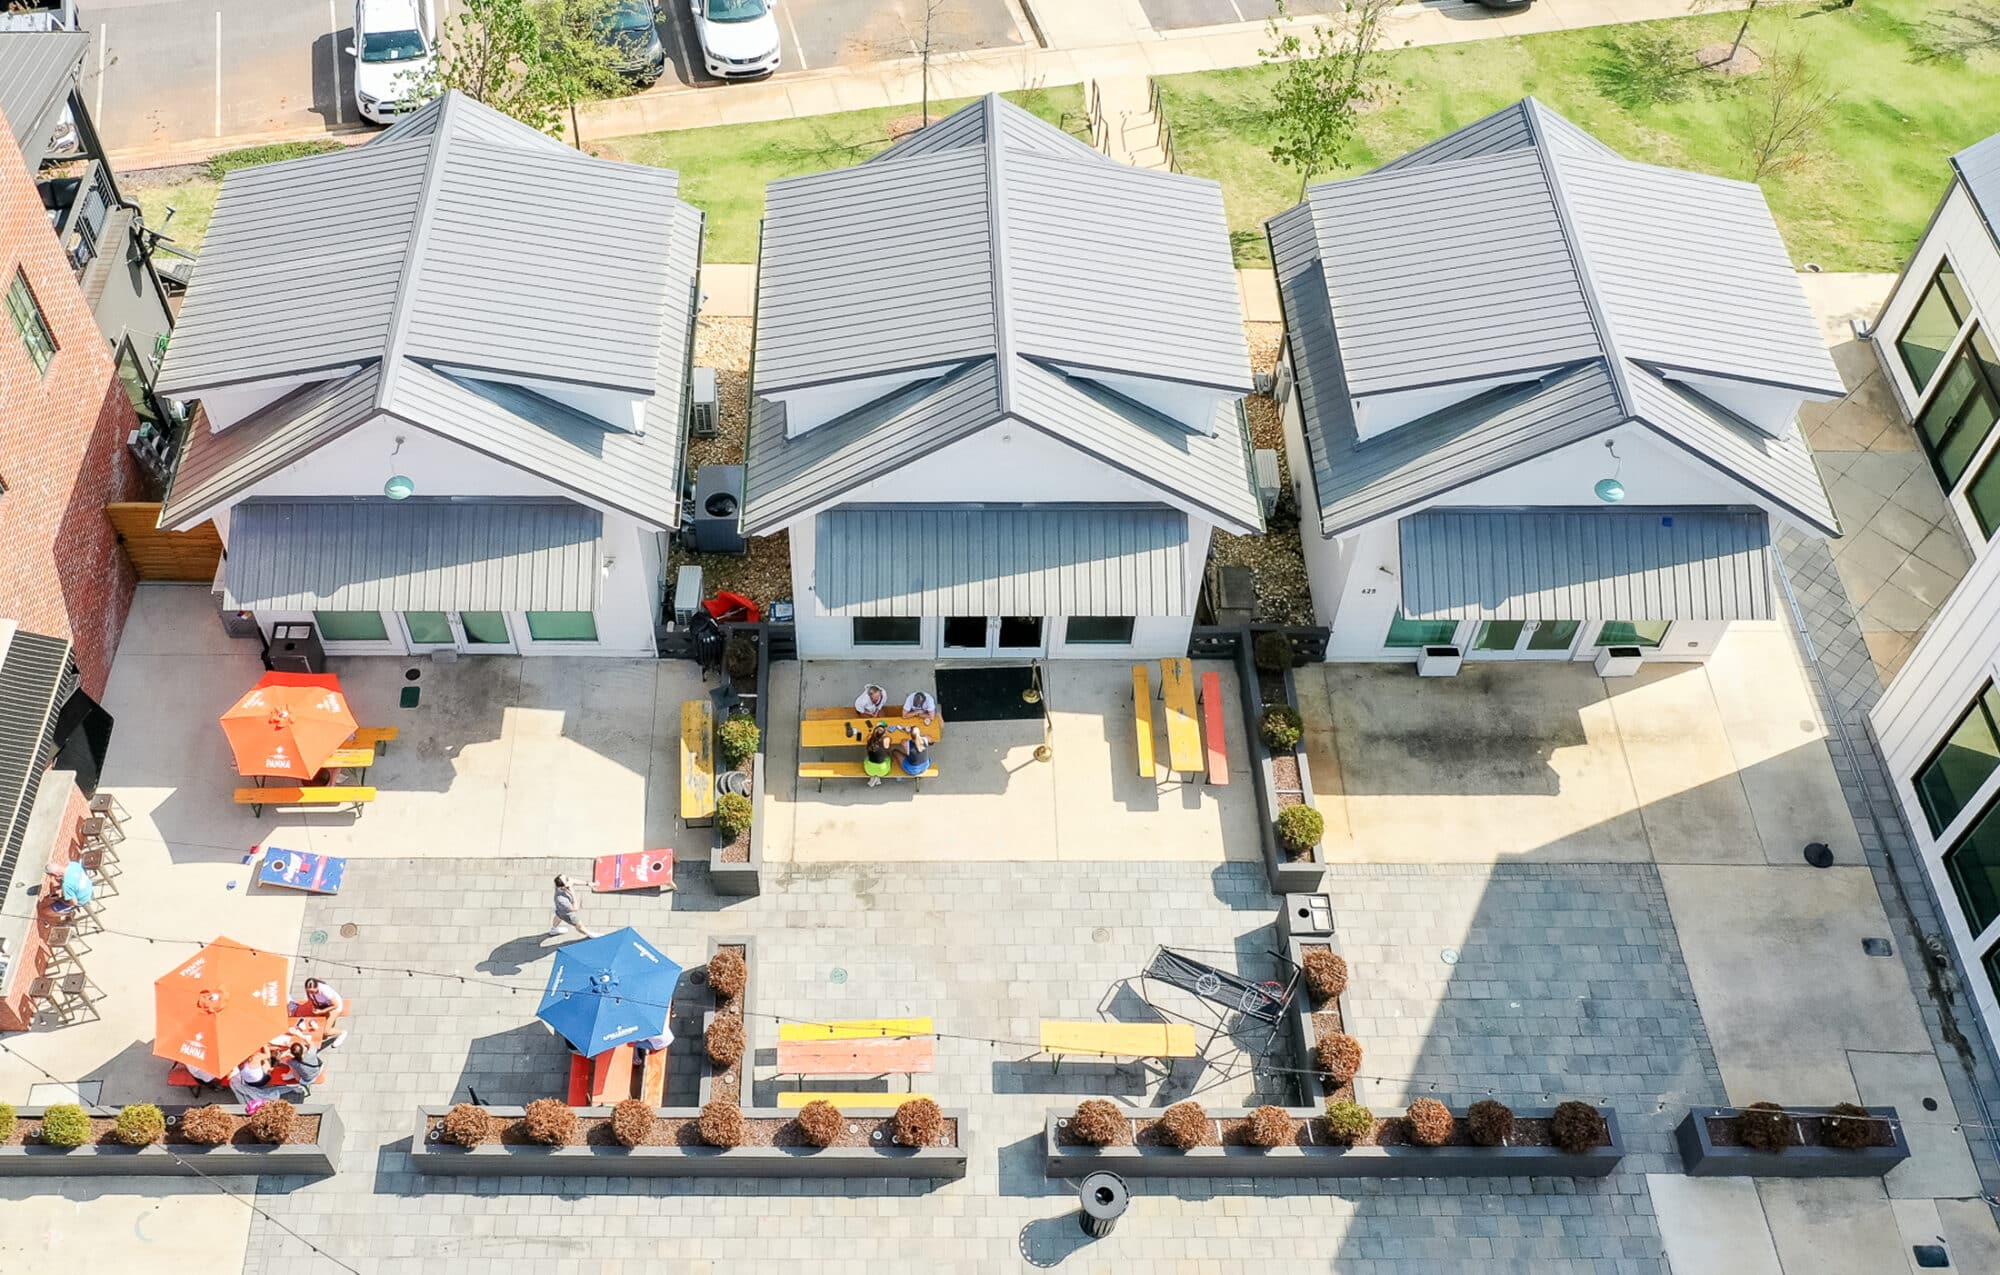 An aerial view of three small buildings at Midtown Auburn with gray rooftops surrounded by a public picnic area. The picnic tables are arranged in a square formation with a tree in the center, providing shade for those seated at the tables. The surrounding area is covered with green grass, and there are small bushes and trees dotted around the area.